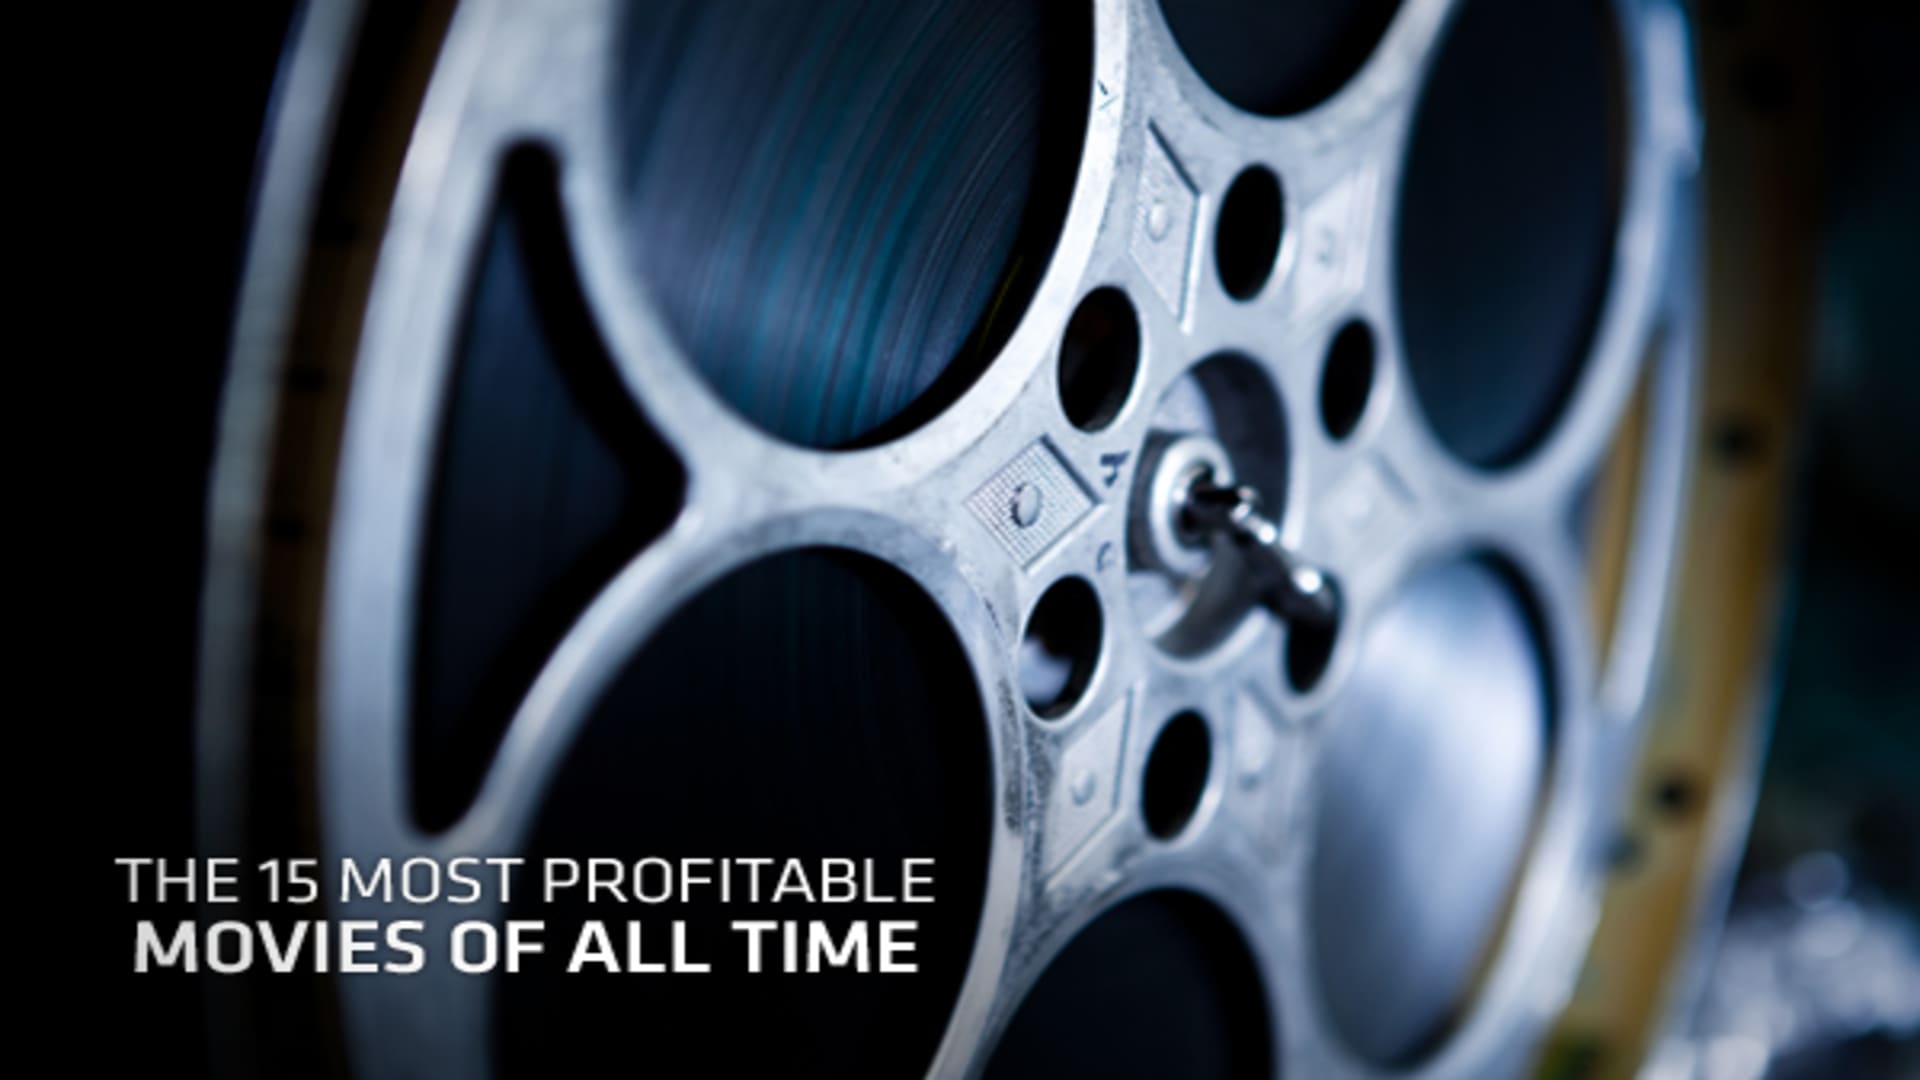 The 15 Most Profitable Movies of All Time